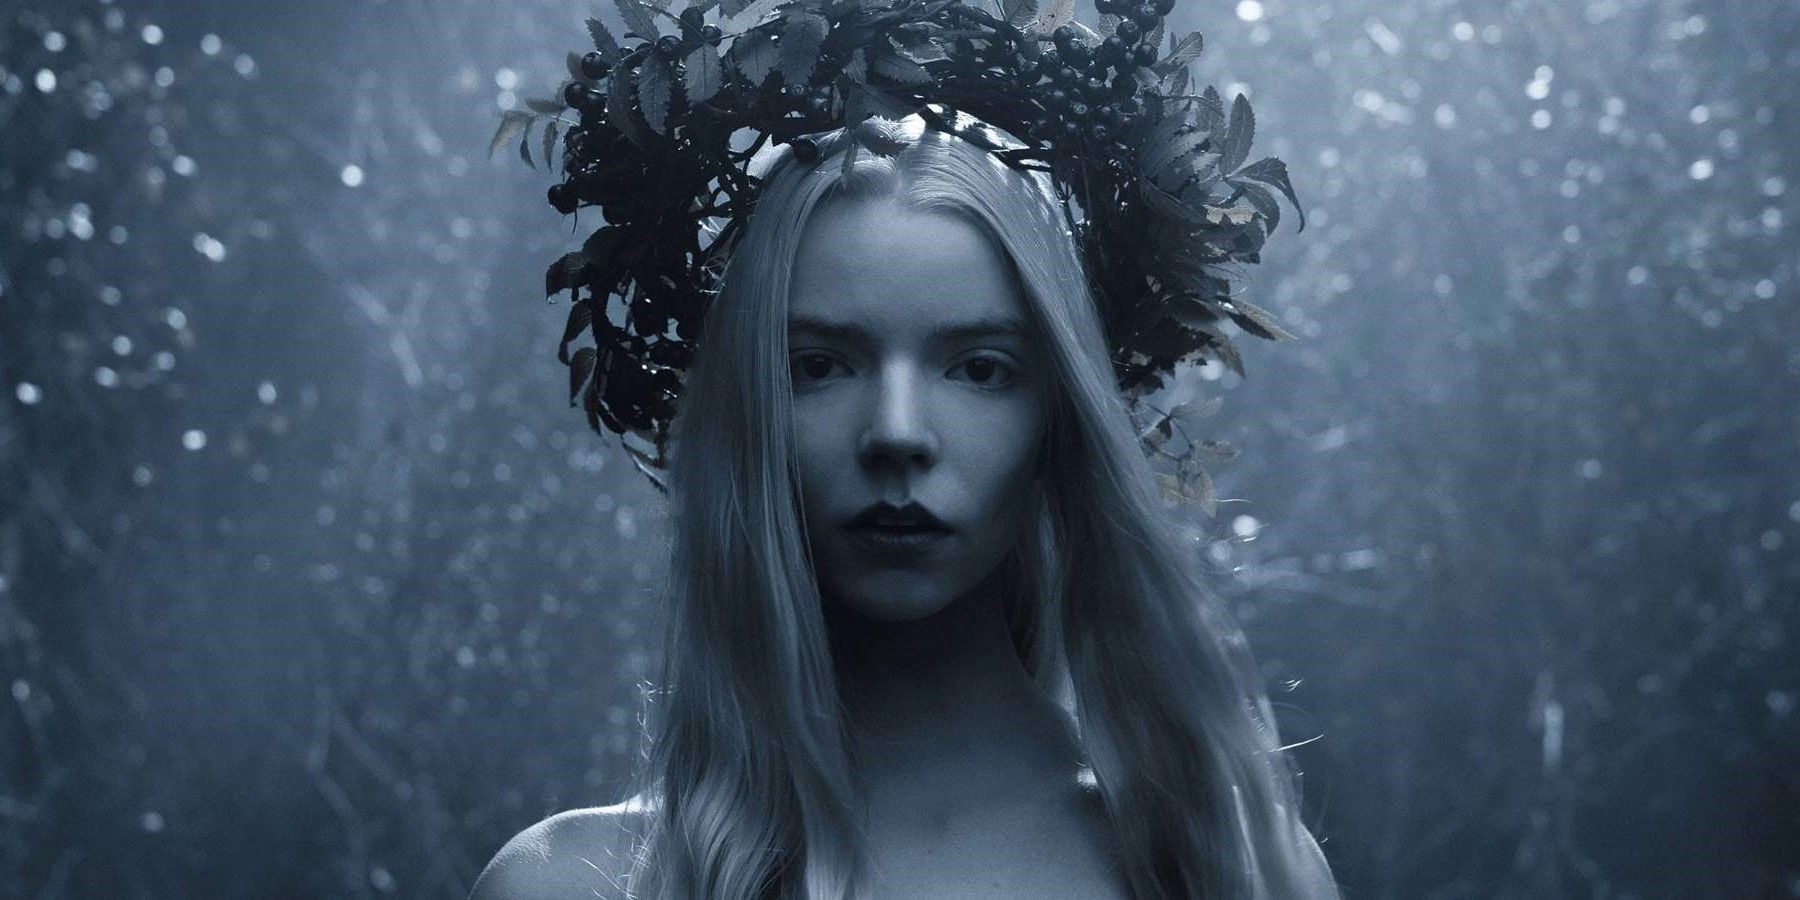 Surrounded by a forest, Olga (Anya Taylor-Joy) wears a makeshift crown in The Northman